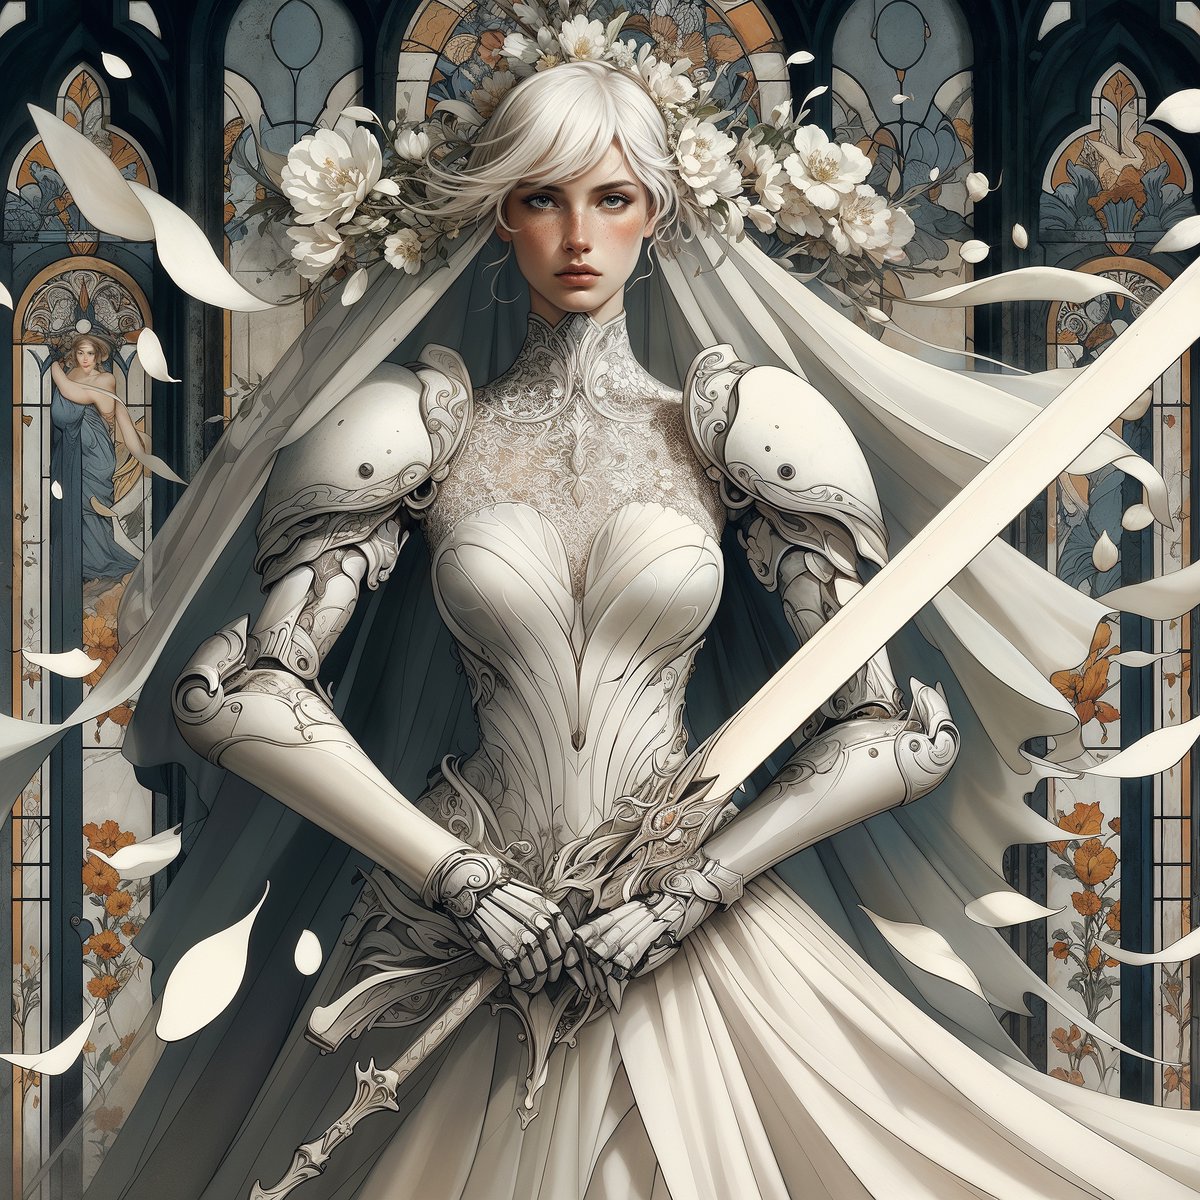 In armored gown of white, she strides so bold, A warrior bride with sword, her tale unfolds. Through battles fierce, her love she will defend, A radiant knight, where heart and honor blend. #AIArtwork #aiart #AIイラスト #AIアート #dalle3art #AI美女 #aiartcommunity